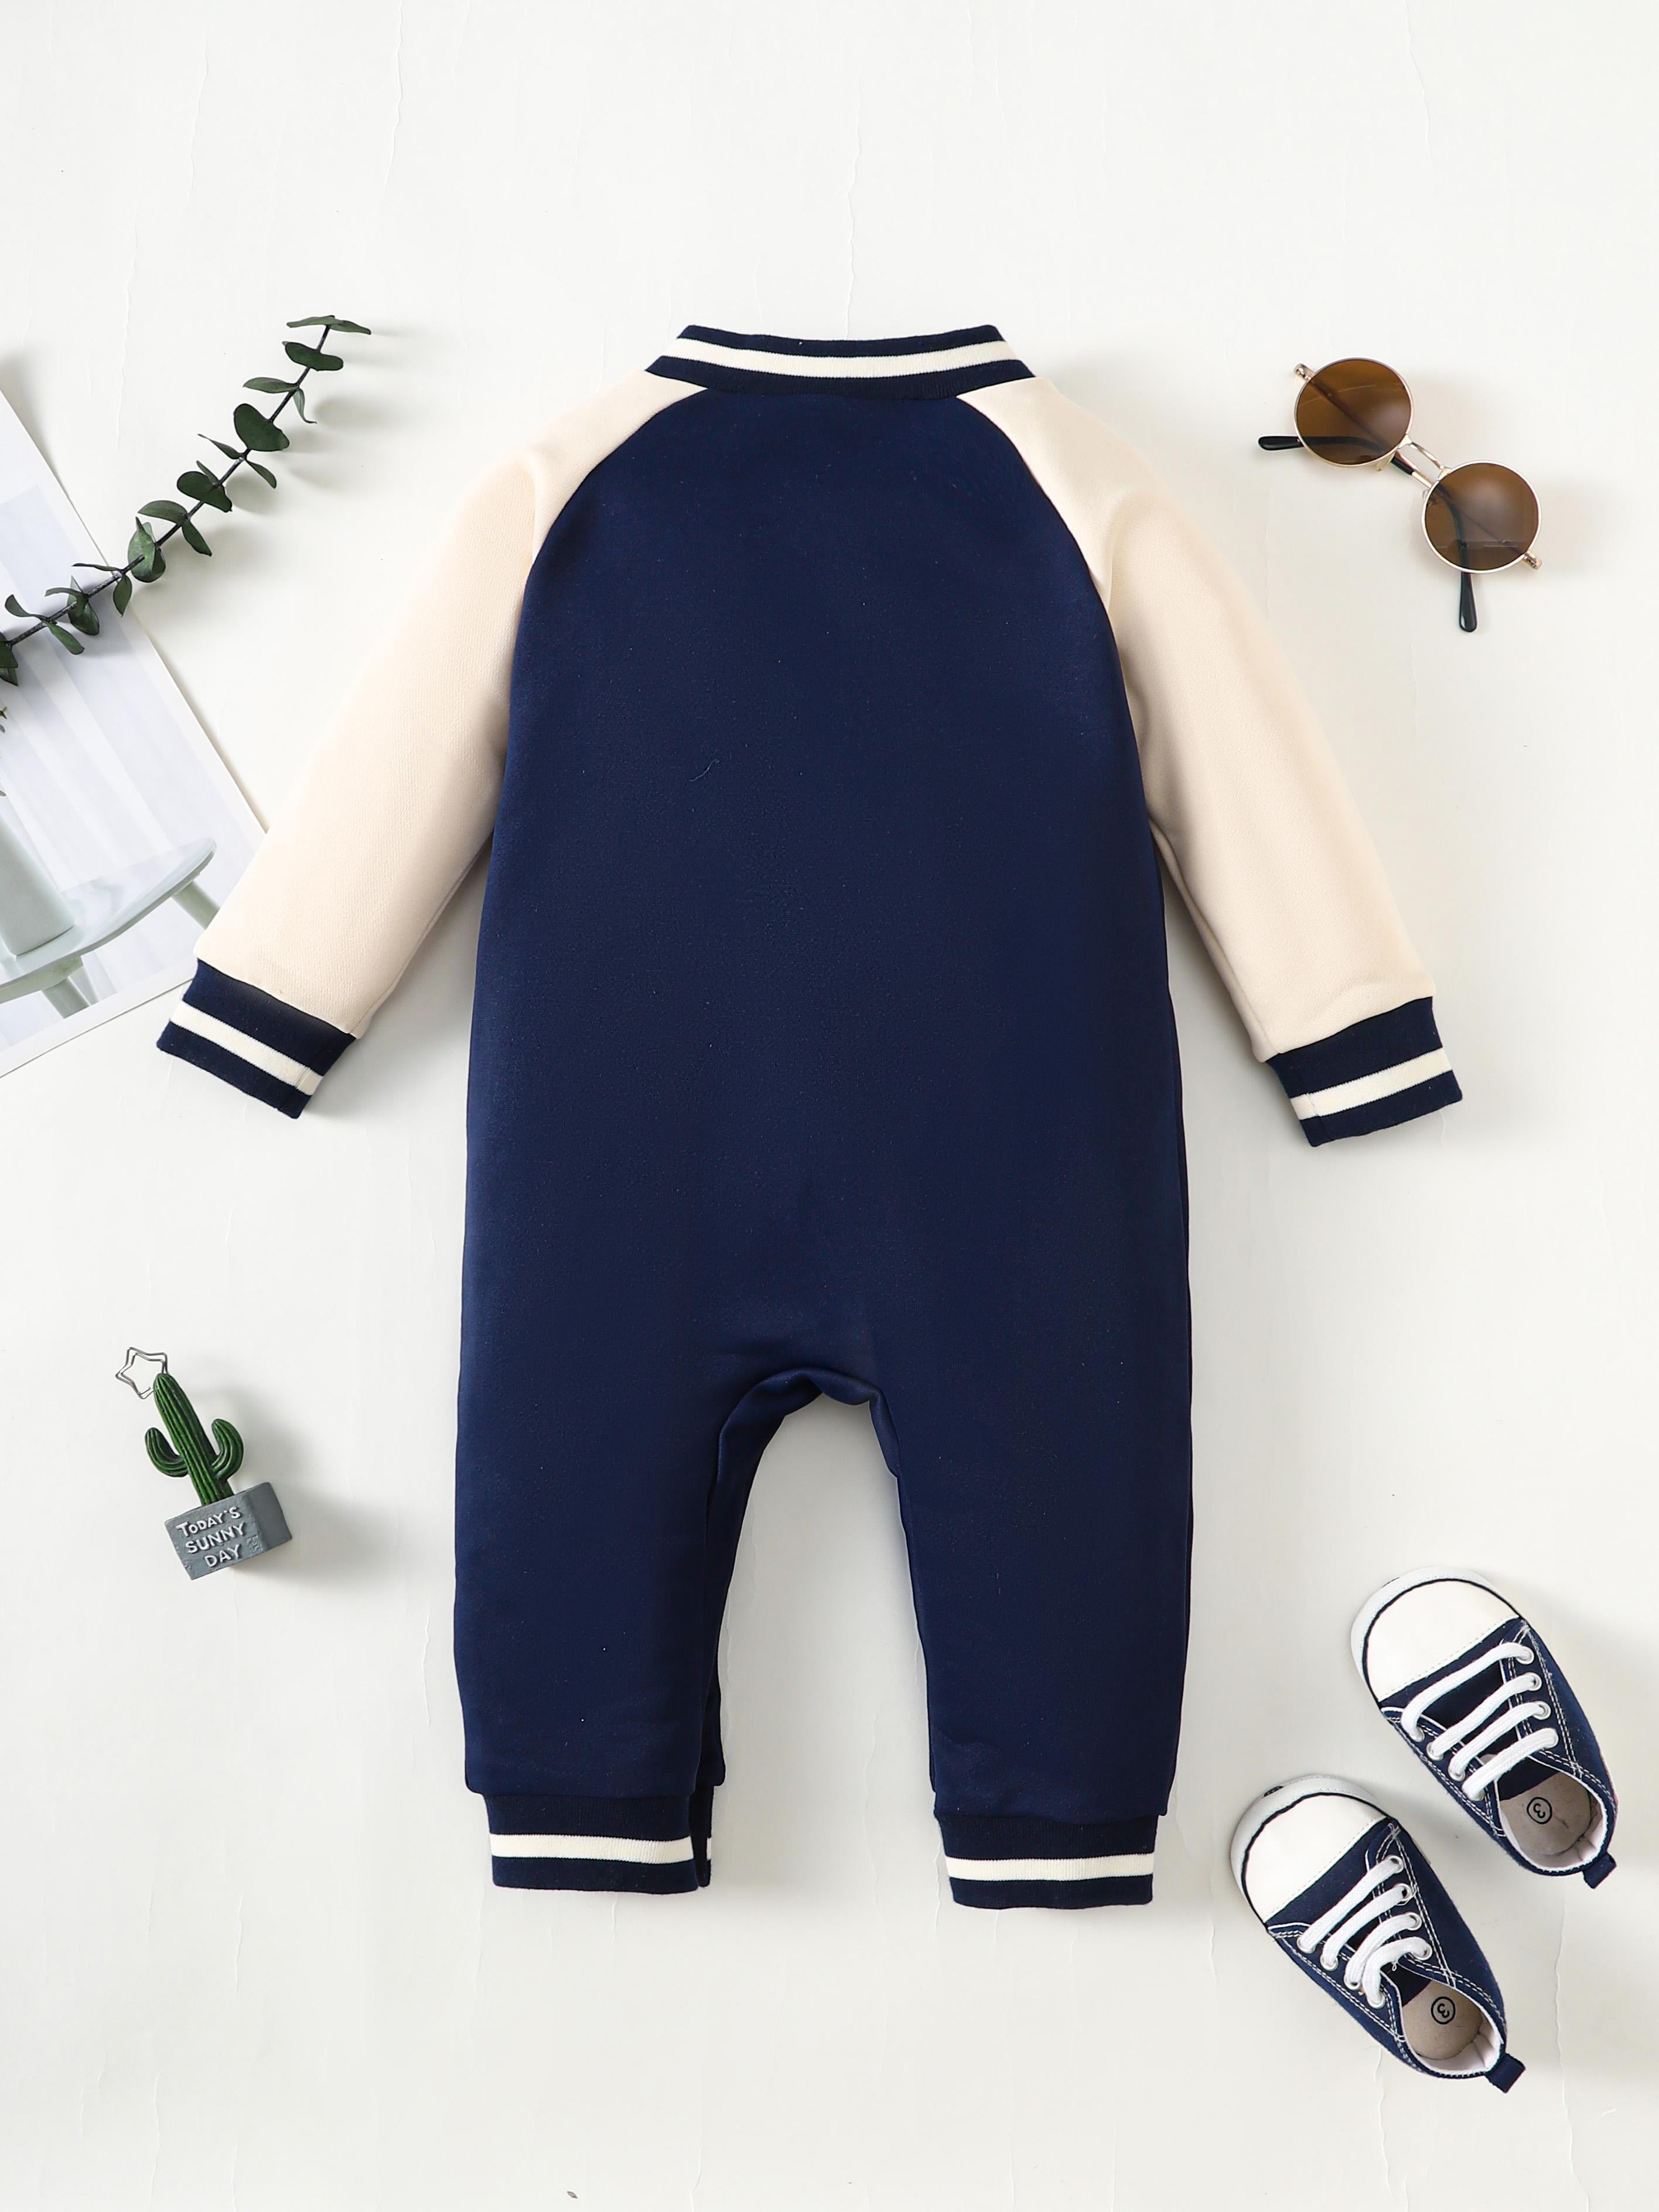 1-18M Baby Boys Romper Blue Baseball Long Sleeve Jumpsuit Baby Bodysuit Wholesale Baby Clothes Catpapa 462307180